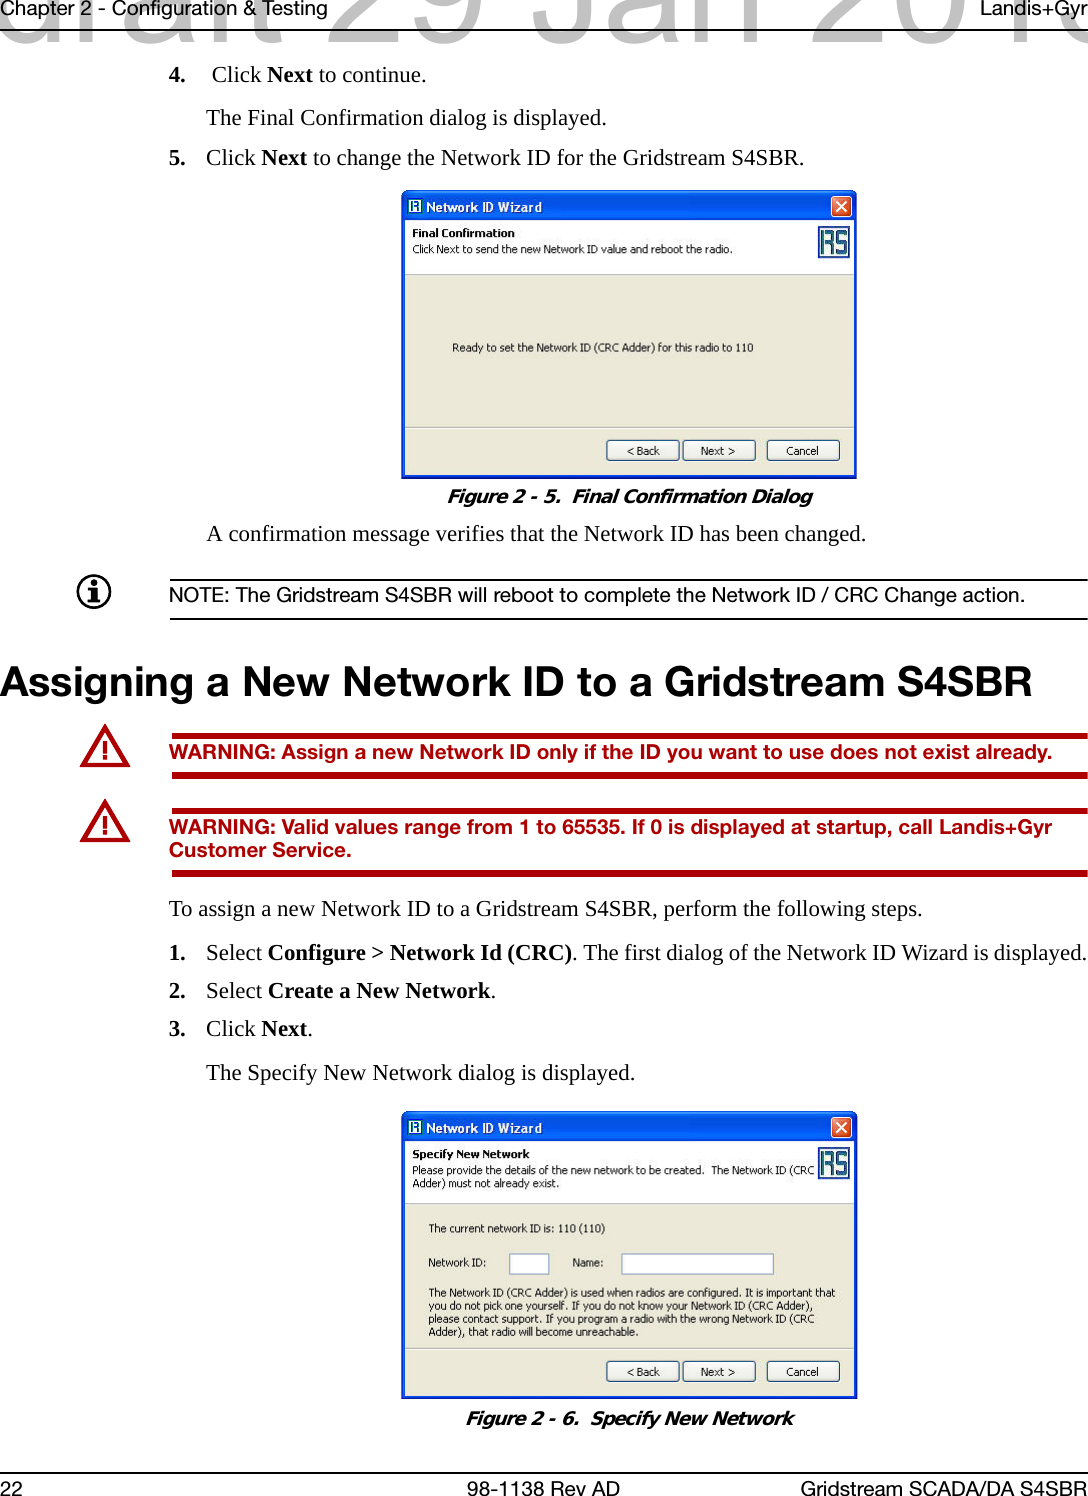 Chapter 2 - Configuration &amp; Testing Landis+Gyr22 98-1138 Rev AD Gridstream SCADA/DA S4SBR4.  Click Next to continue.The Final Confirmation dialog is displayed.5. Click Next to change the Network ID for the Gridstream S4SBR.Figure 2 - 5.  Final Confirmation DialogA confirmation message verifies that the Network ID has been changed.NOTE: The Gridstream S4SBR will reboot to complete the Network ID / CRC Change action.Assigning a New Network ID to a Gridstream S4SBRUWARNING: Assign a new Network ID only if the ID you want to use does not exist already.UWARNING: Valid values range from 1 to 65535. If 0 is displayed at startup, call Landis+Gyr Customer Service.To assign a new Network ID to a Gridstream S4SBR, perform the following steps.1. Select Configure &gt; Network Id (CRC). The first dialog of the Network ID Wizard is displayed.2. Select Create a New Network.3. Click Next.The Specify New Network dialog is displayed.Figure 2 - 6.  Specify New Networkdraft 29 Jan 2013